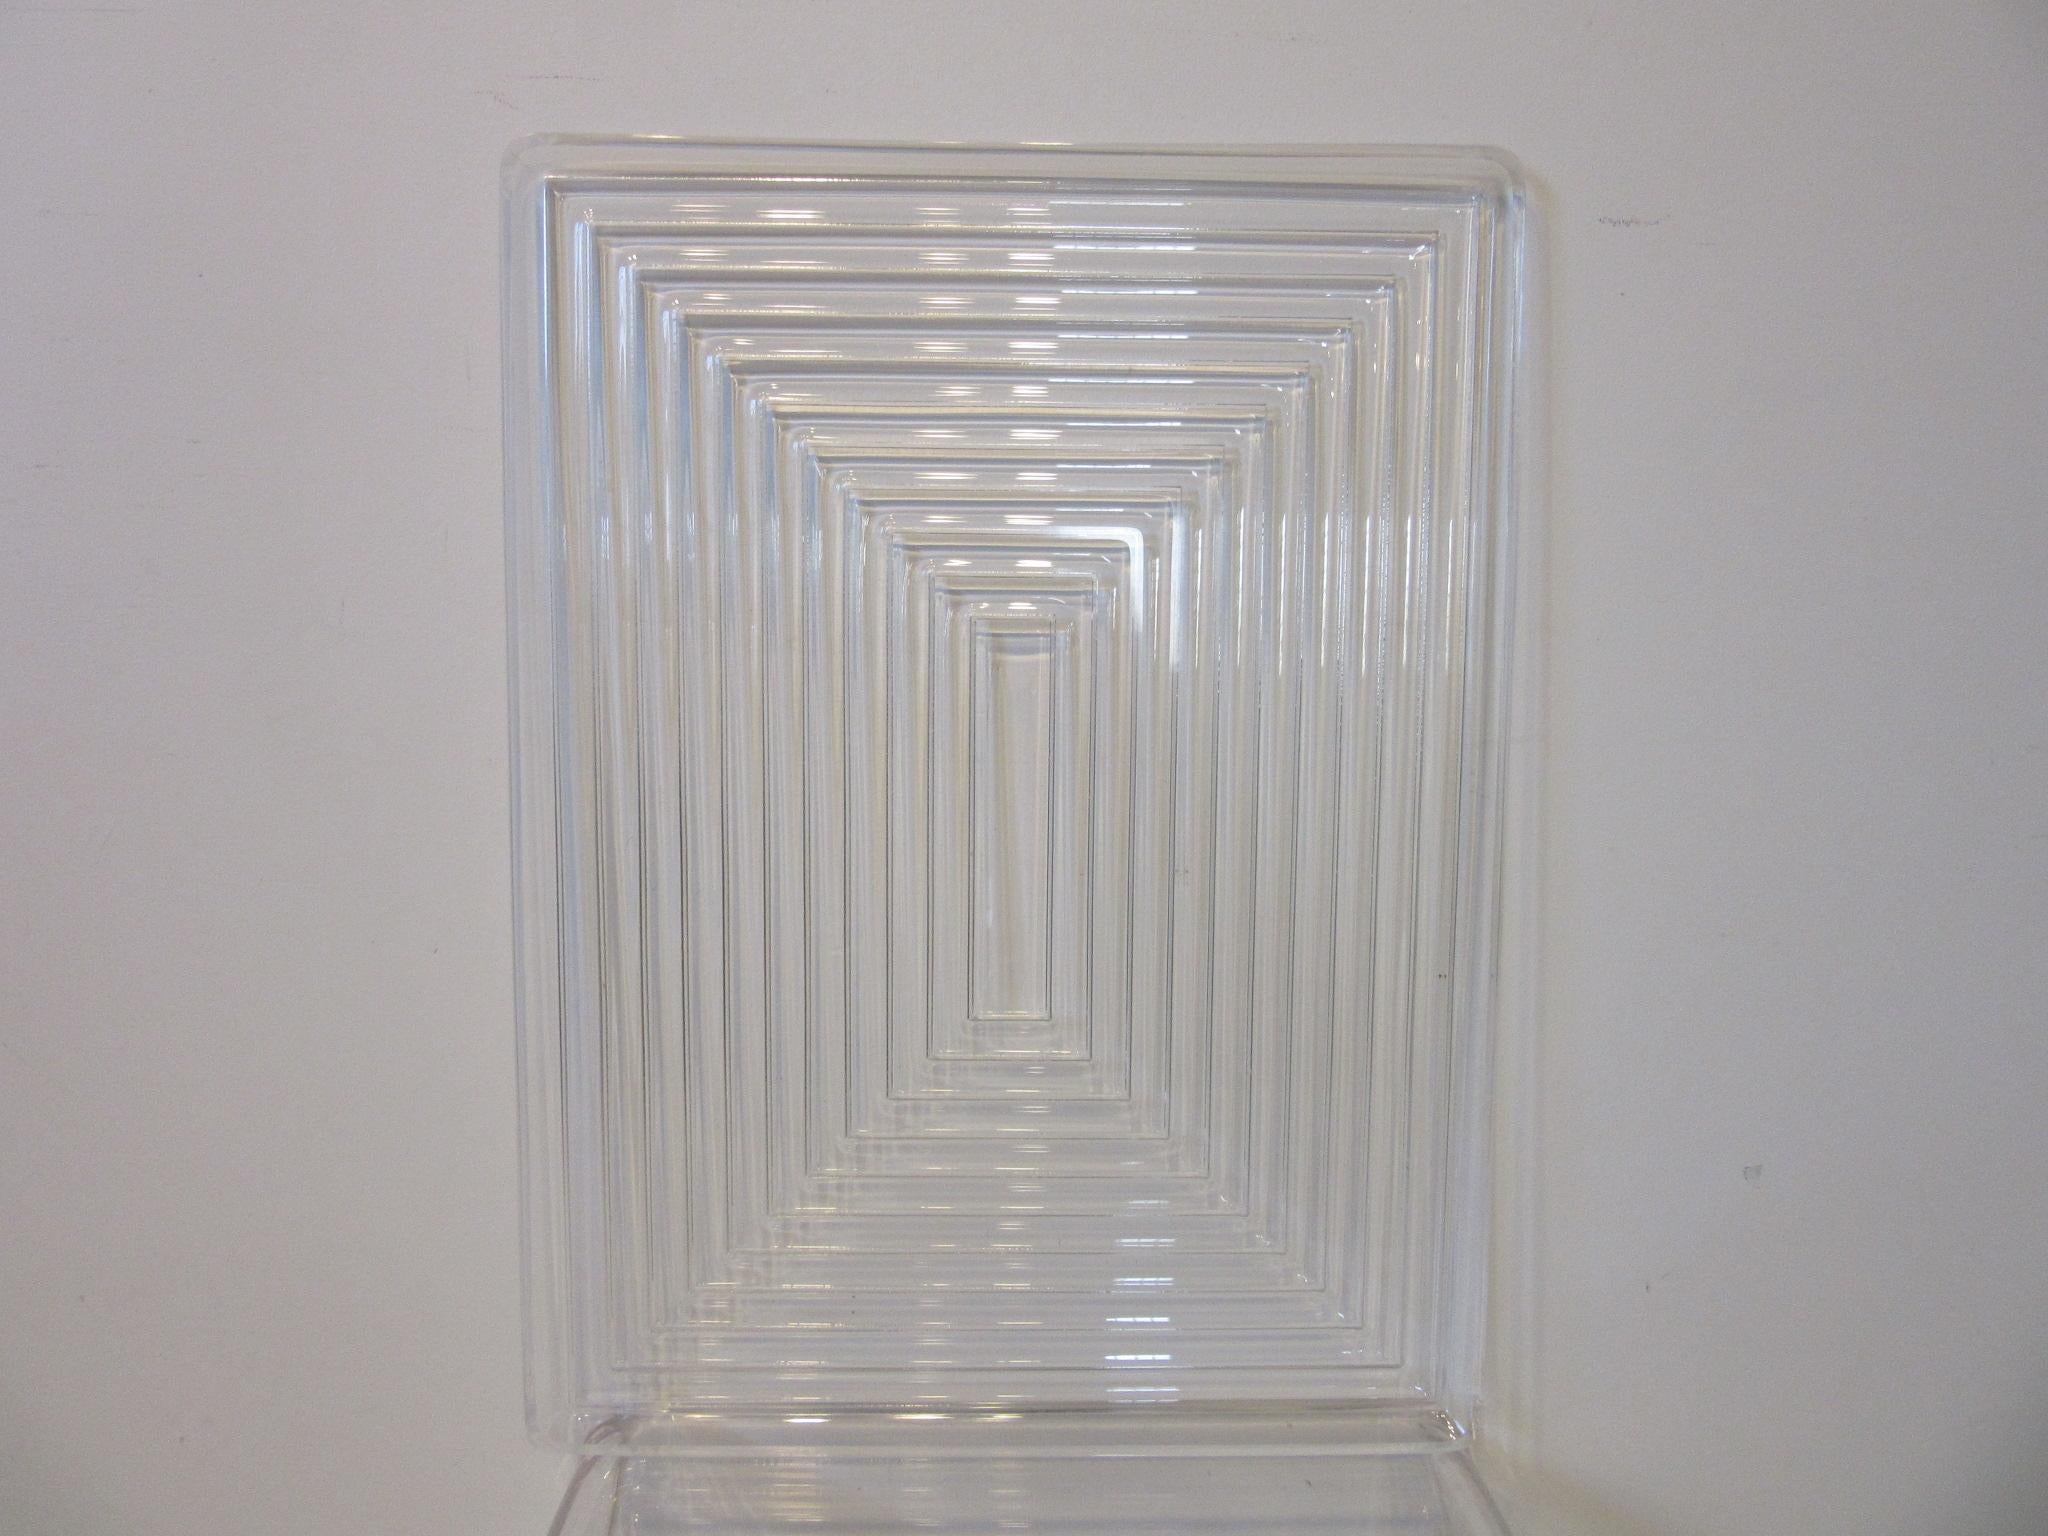 A large well crafted Lucite serving tray with raised horizontal and vertical line designs getting tighter towards the center giving the piece a sophisticated look in the manner of Eliel Saarinen and Art Deco.